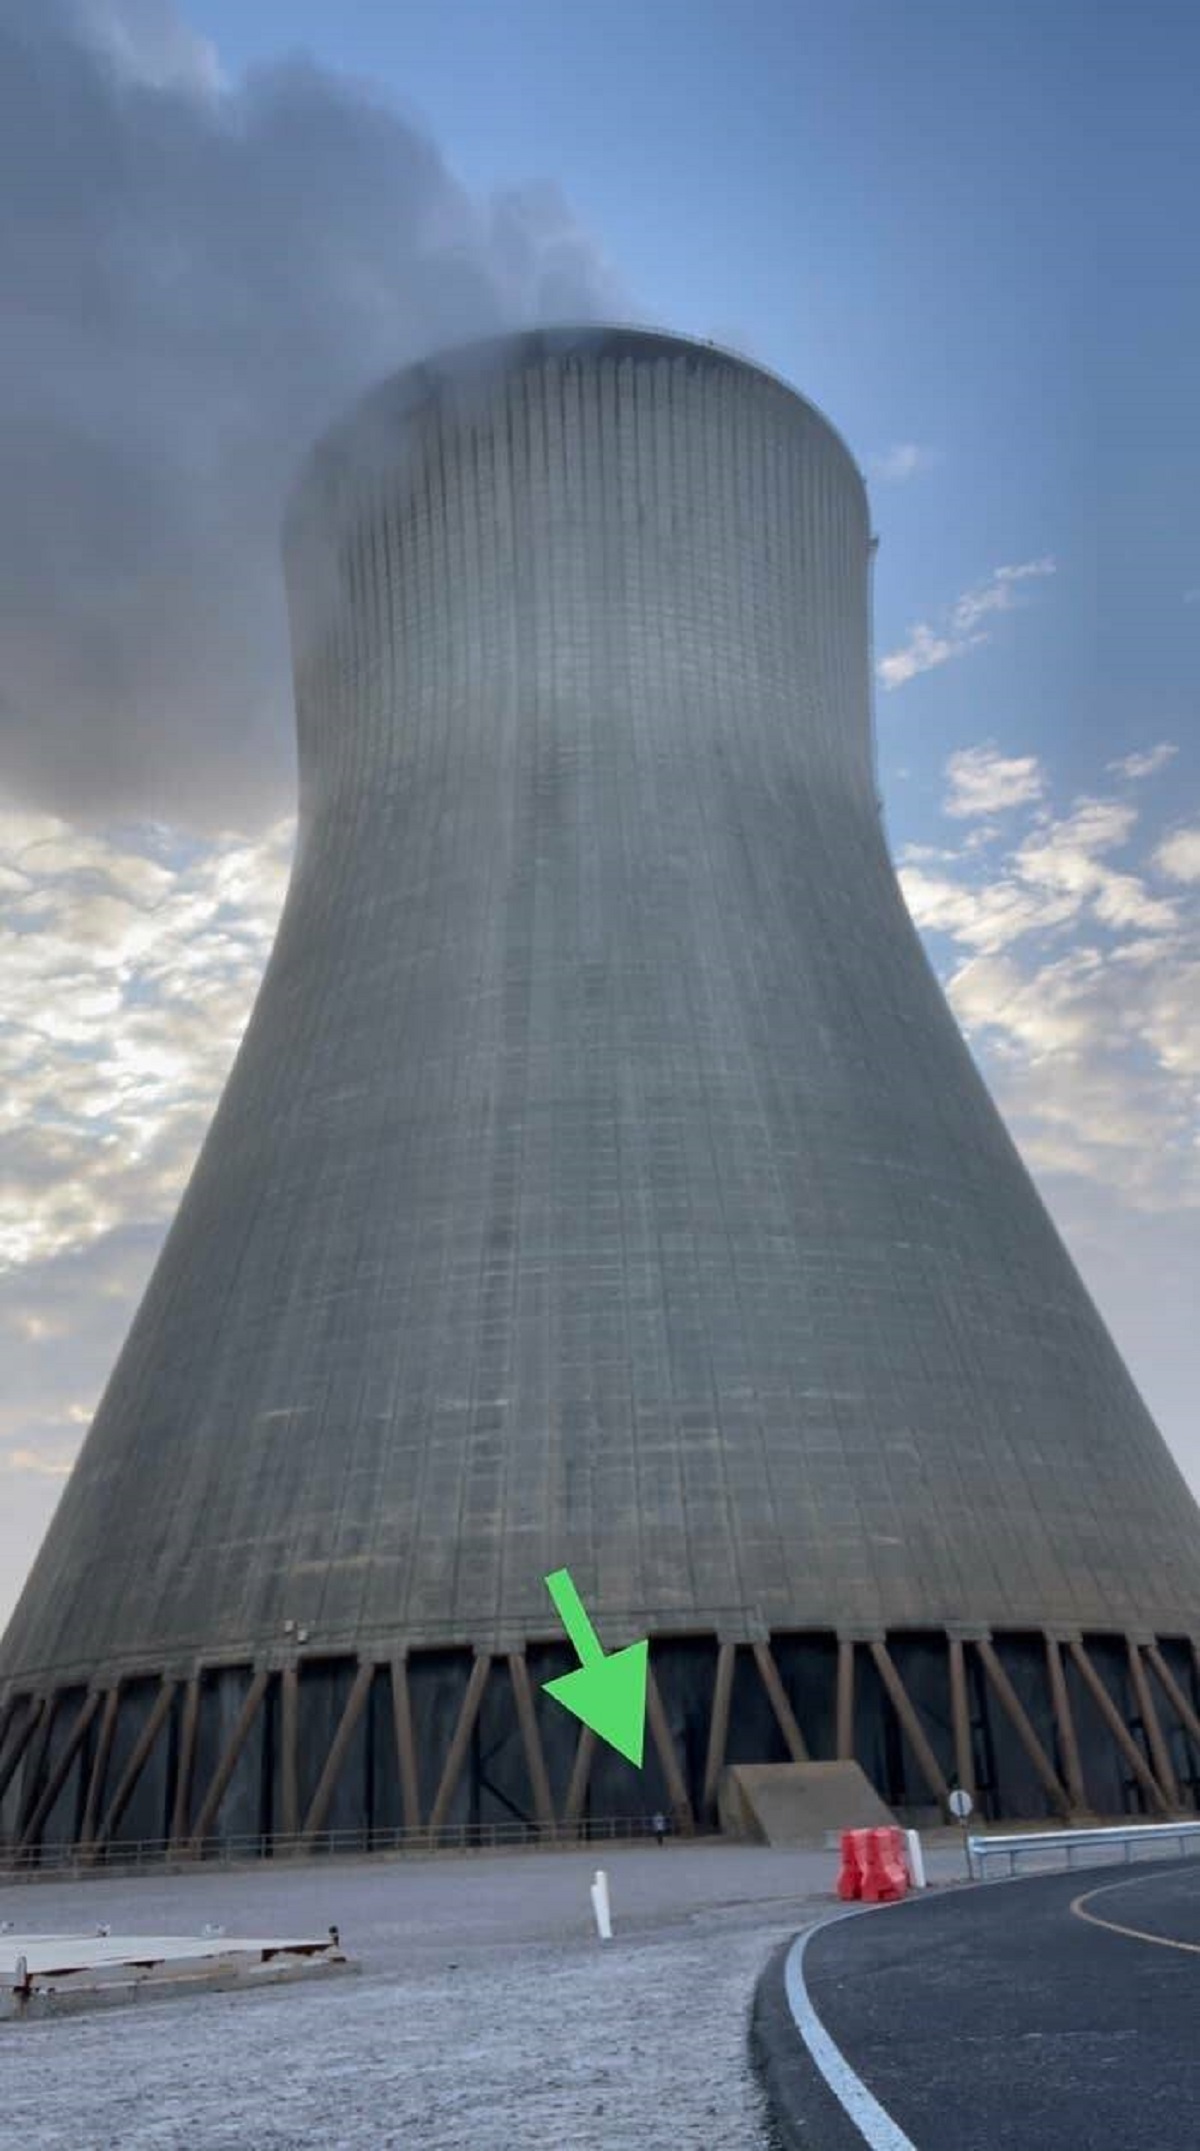 This is how big a nuclear cooling tower is compared to a person: